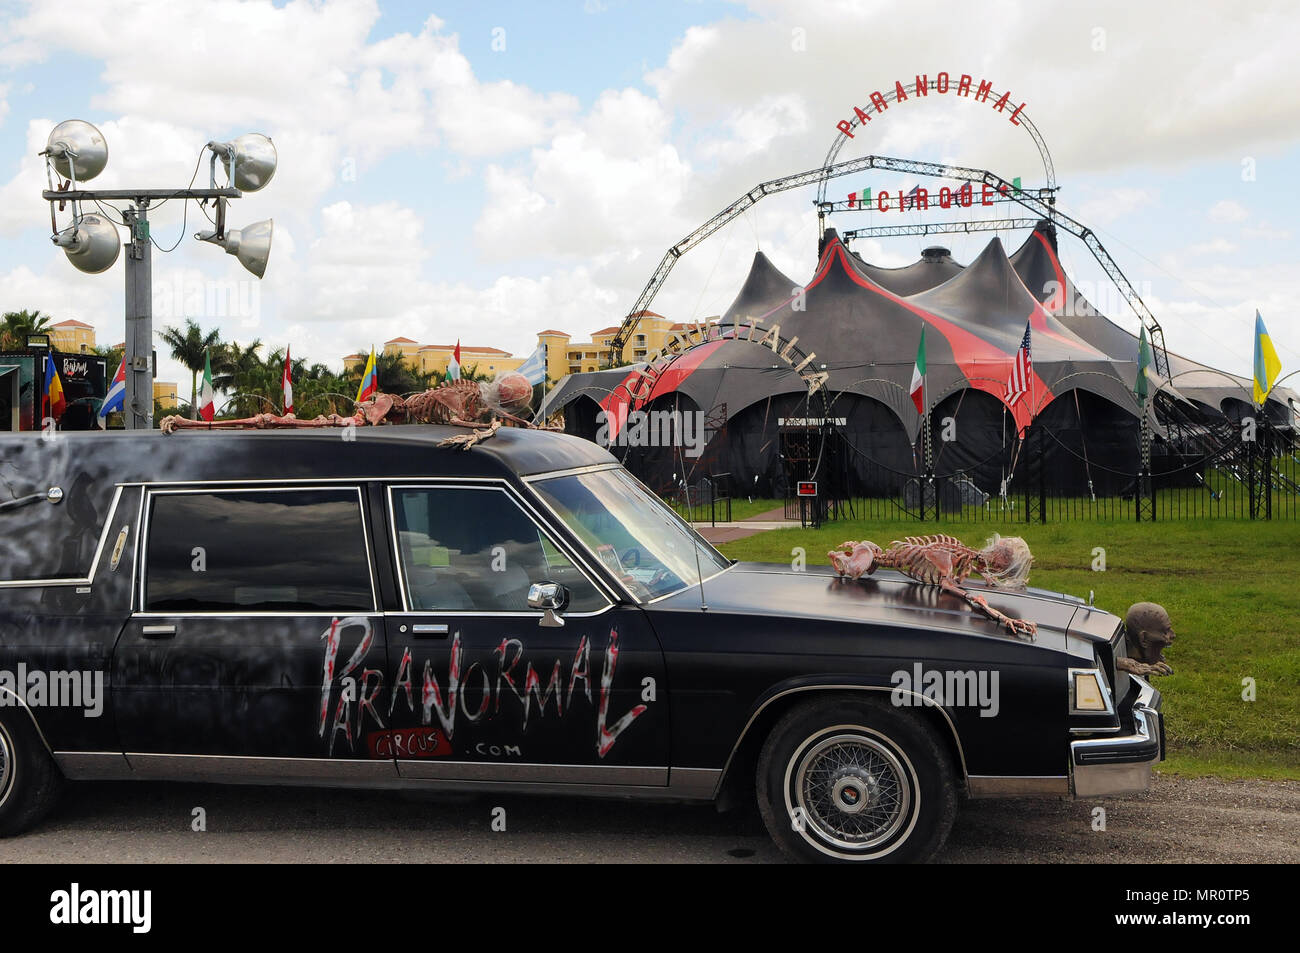 Palmetto, Florida, USA. 23rd May, 2018. A hearse adorned with skeletons is seen in front of the Paranormal Cirque circus tent during a media preview on May 23, 2018 in Palmetto, Florida. The new Paranormal Cirque, created by Manuel Rebecca, the president and owner of Cirque Italia, is in rehearsals for its first ever performance in Palmetto, Florida on June 7, 2018. The circus combines horror, stunts, illusions, theater, and cabaret, and is designed for an adult audience. (Paul Hennessy/Alamy) Credit: Paul Hennessy/Alamy Live News Stock Photo